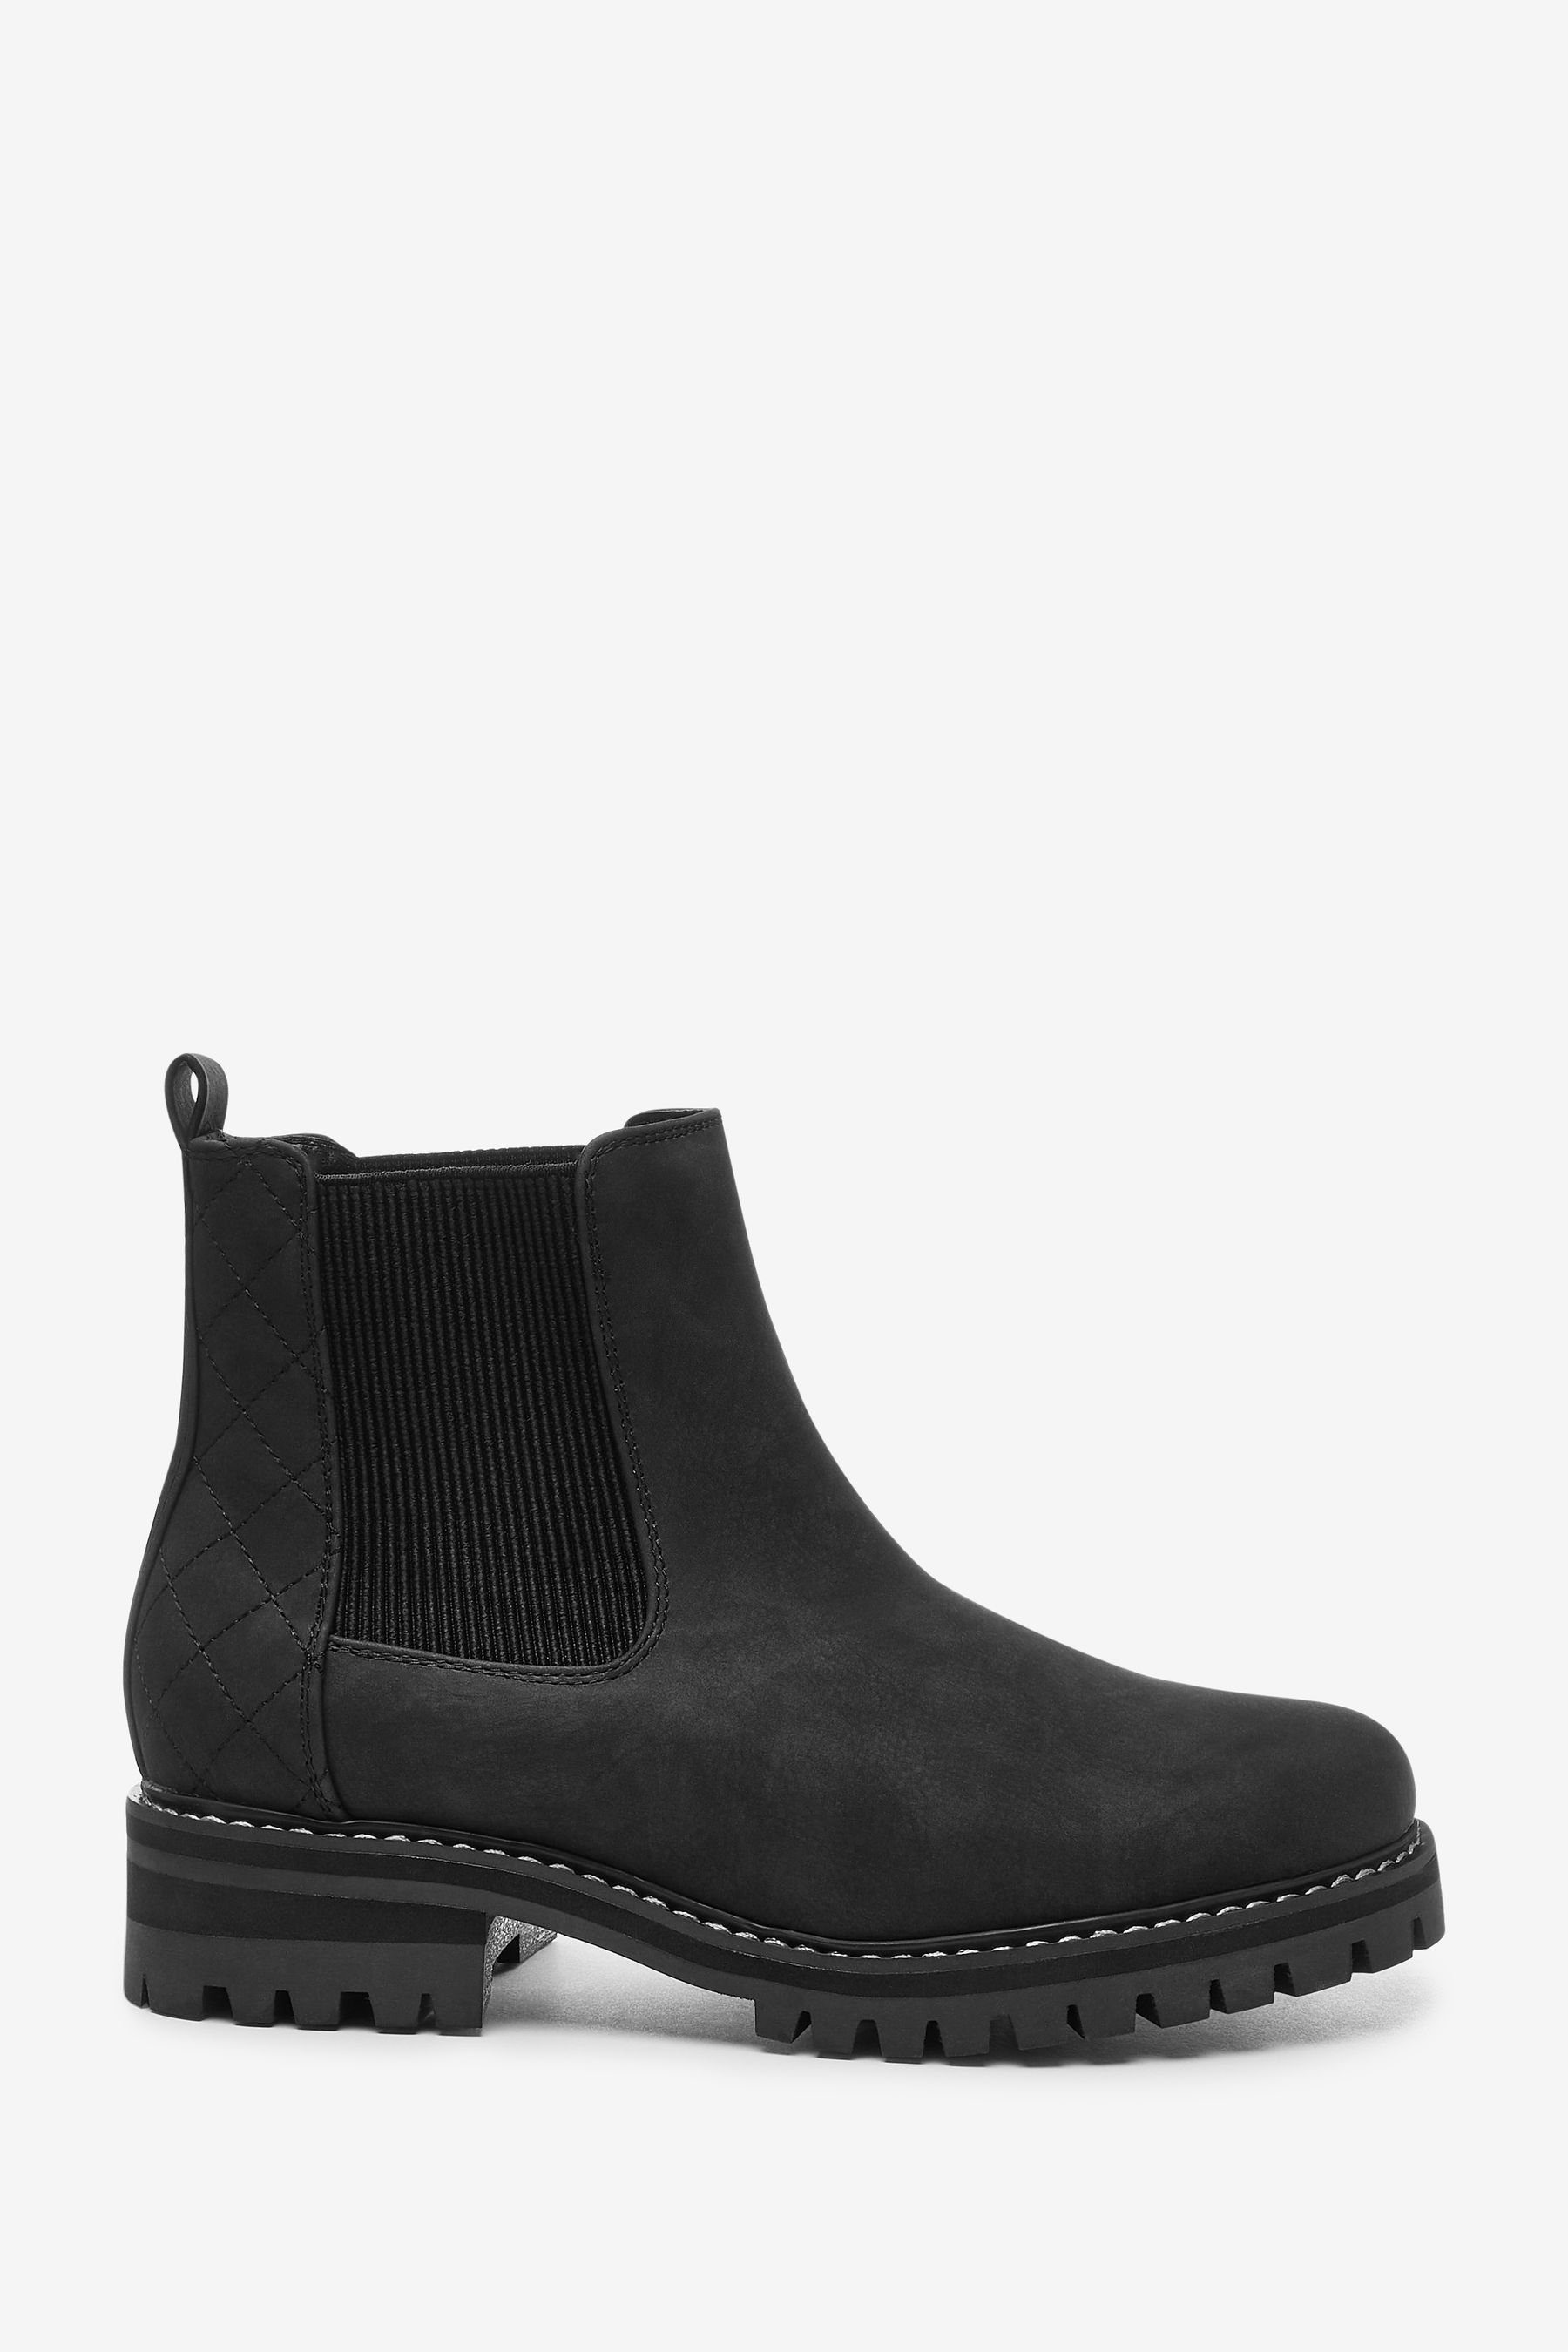 Next Forever Comfort Chelseas, extra (1-tlg) Black Passform weite Chelseaboots